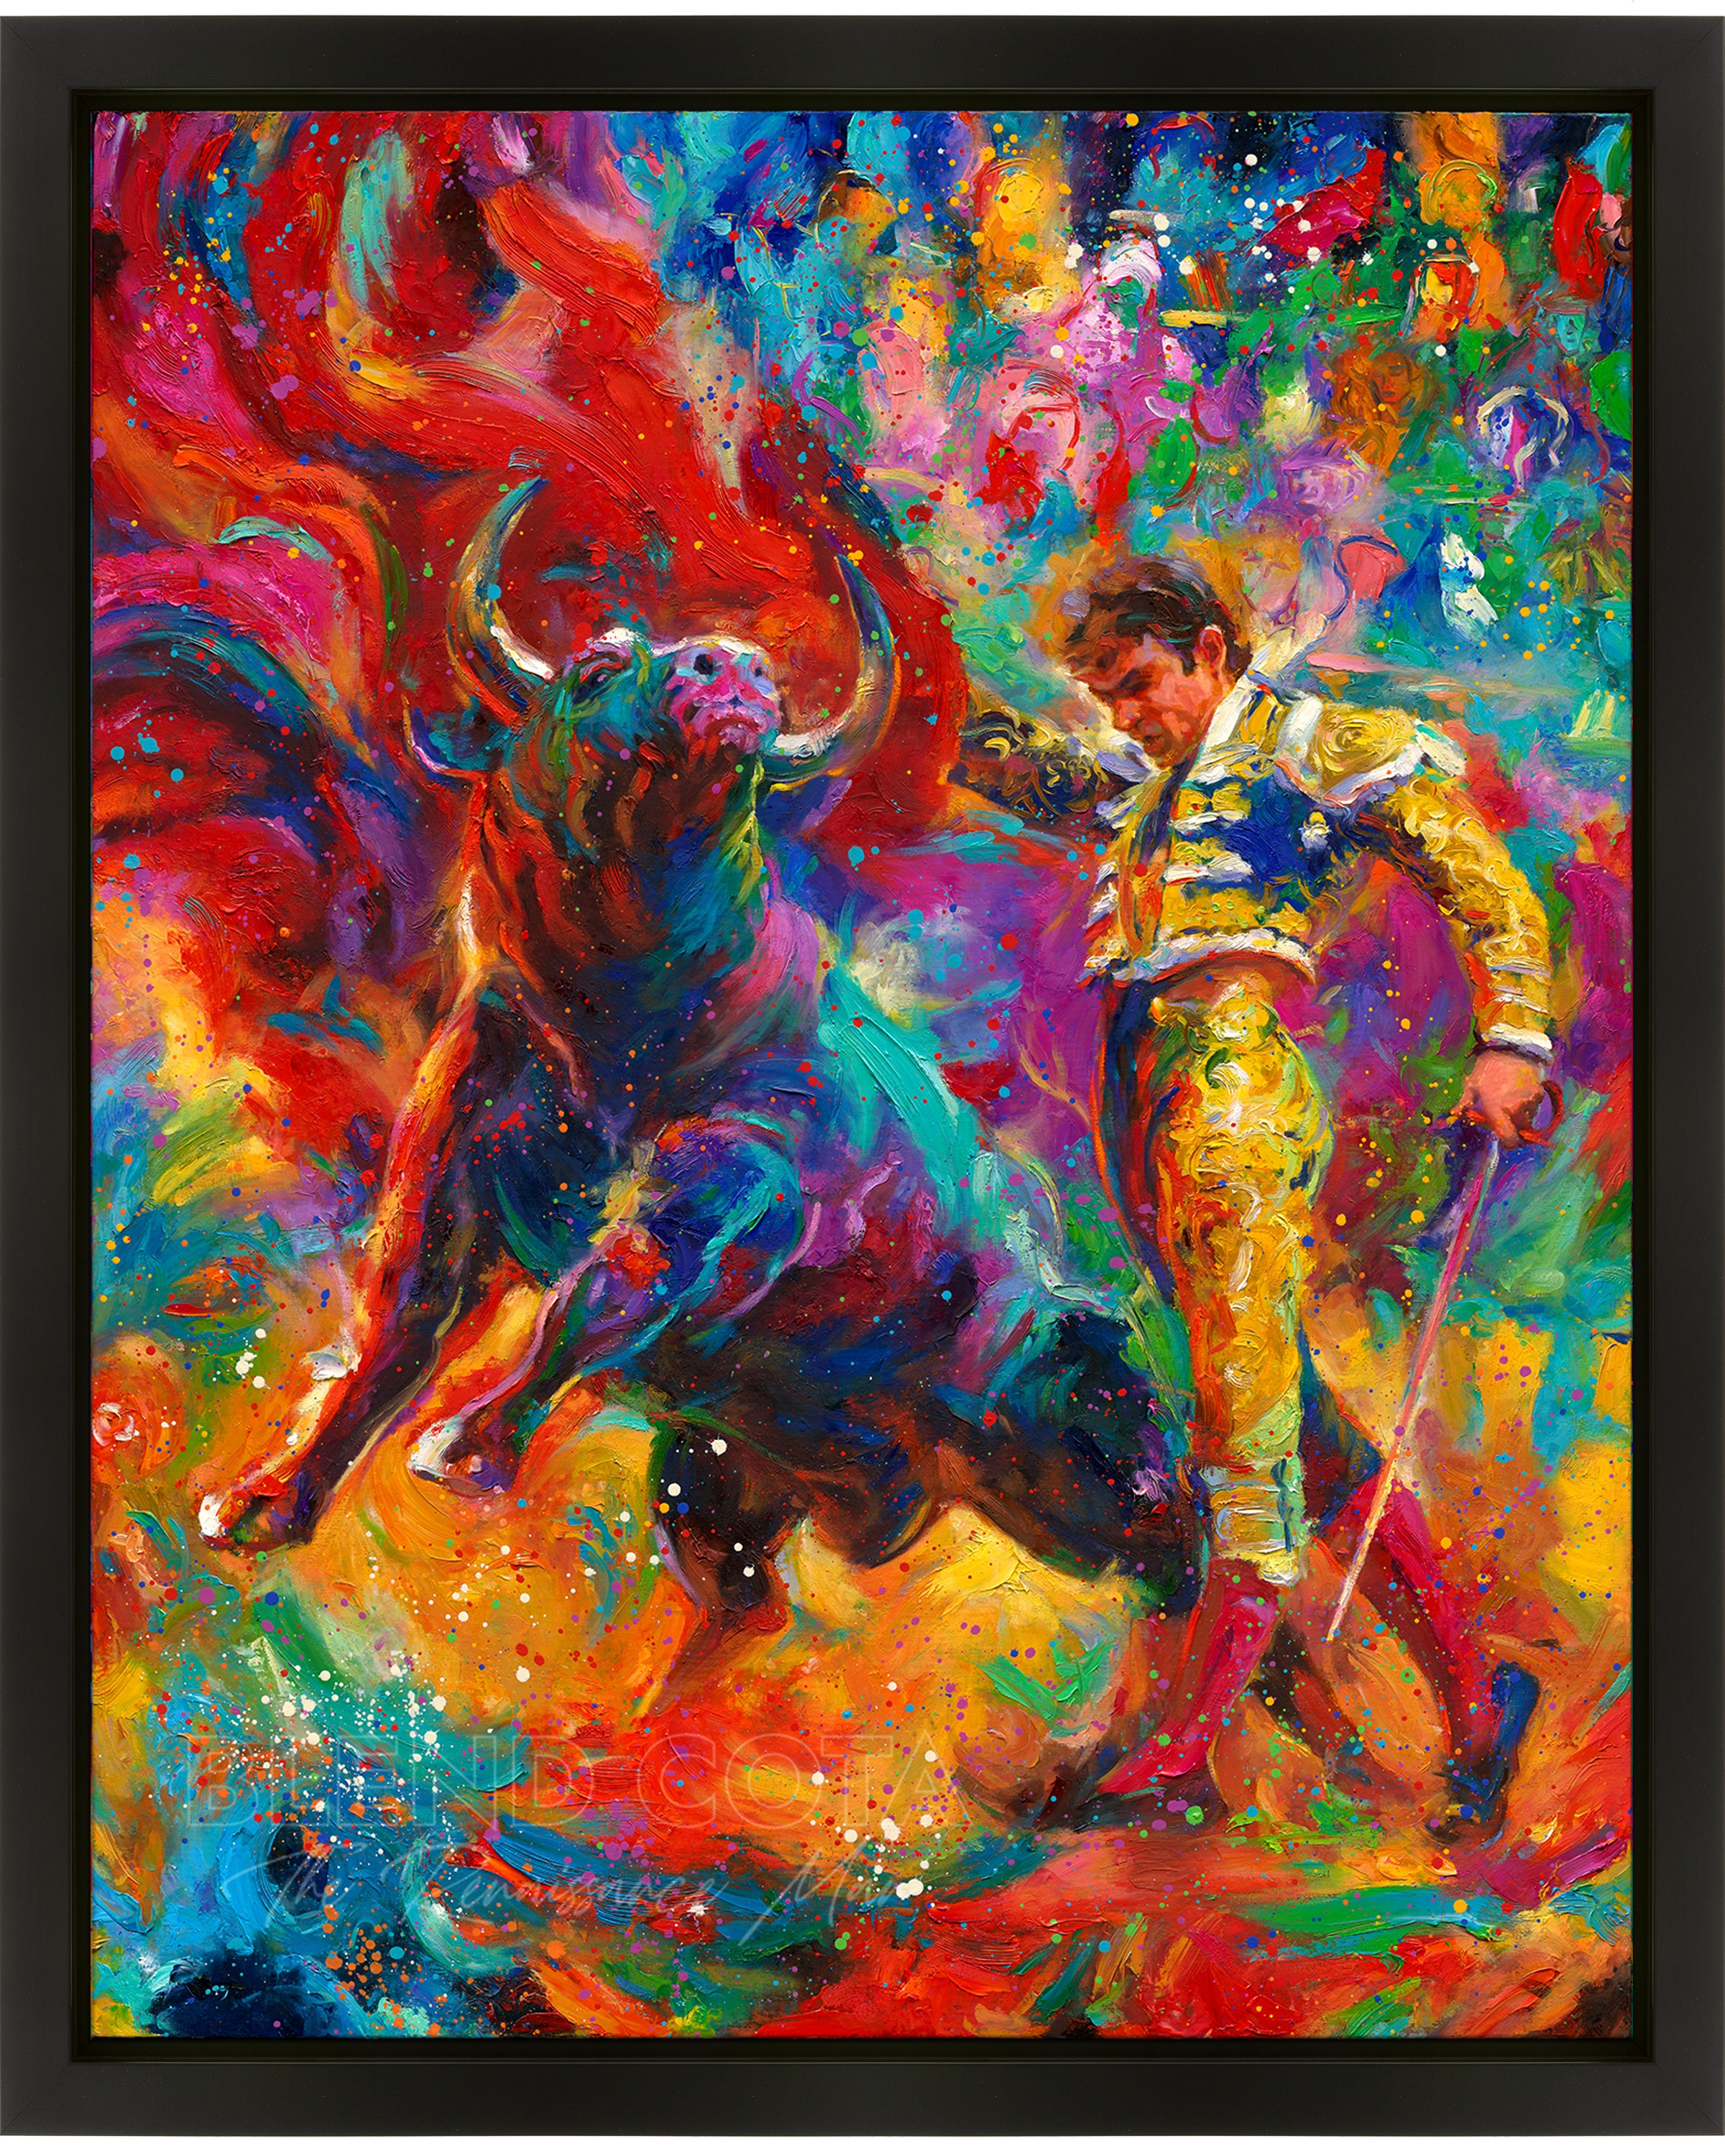 Oil on canvas original painting of the Matador, a bullfighter in midst of a dance with the bull, using a red cape to distract and entrance the best, with a crown cheerring on in the background, in colorful brushstrokes, color expressionism style.